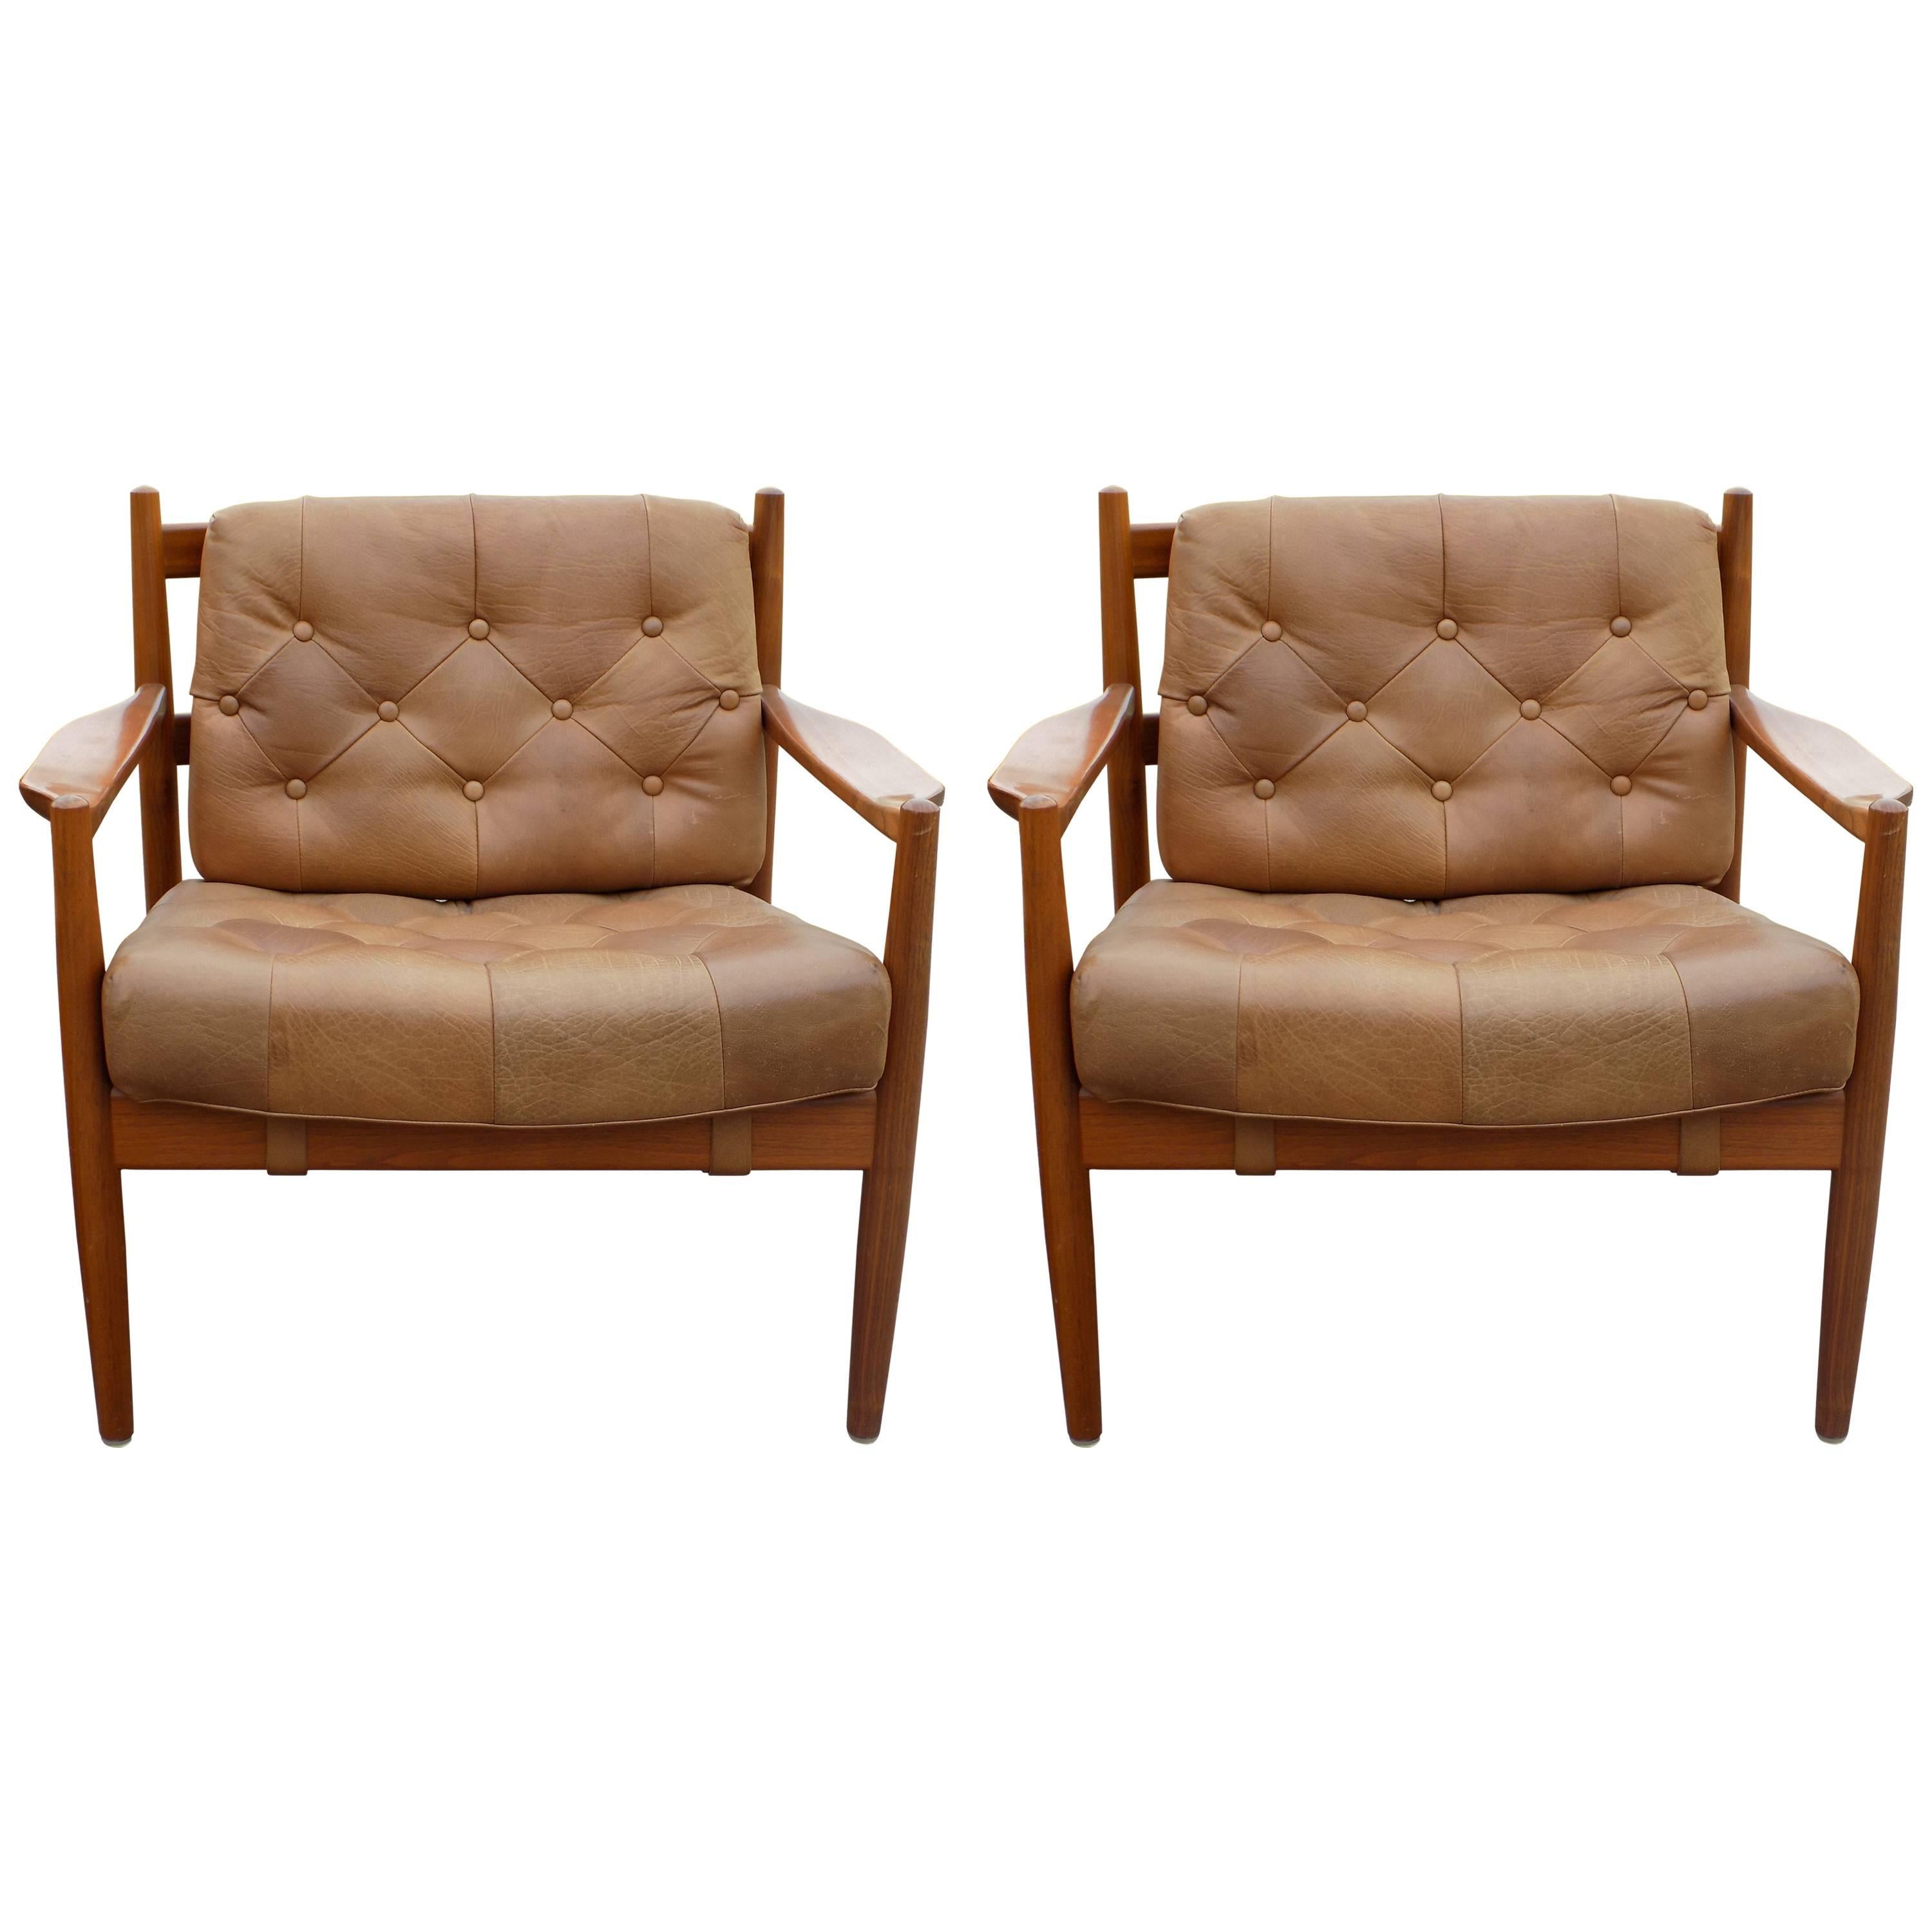 Pair of Armchairs by Ingemar Thillmark for OPE Mobler, Midcentury Modern